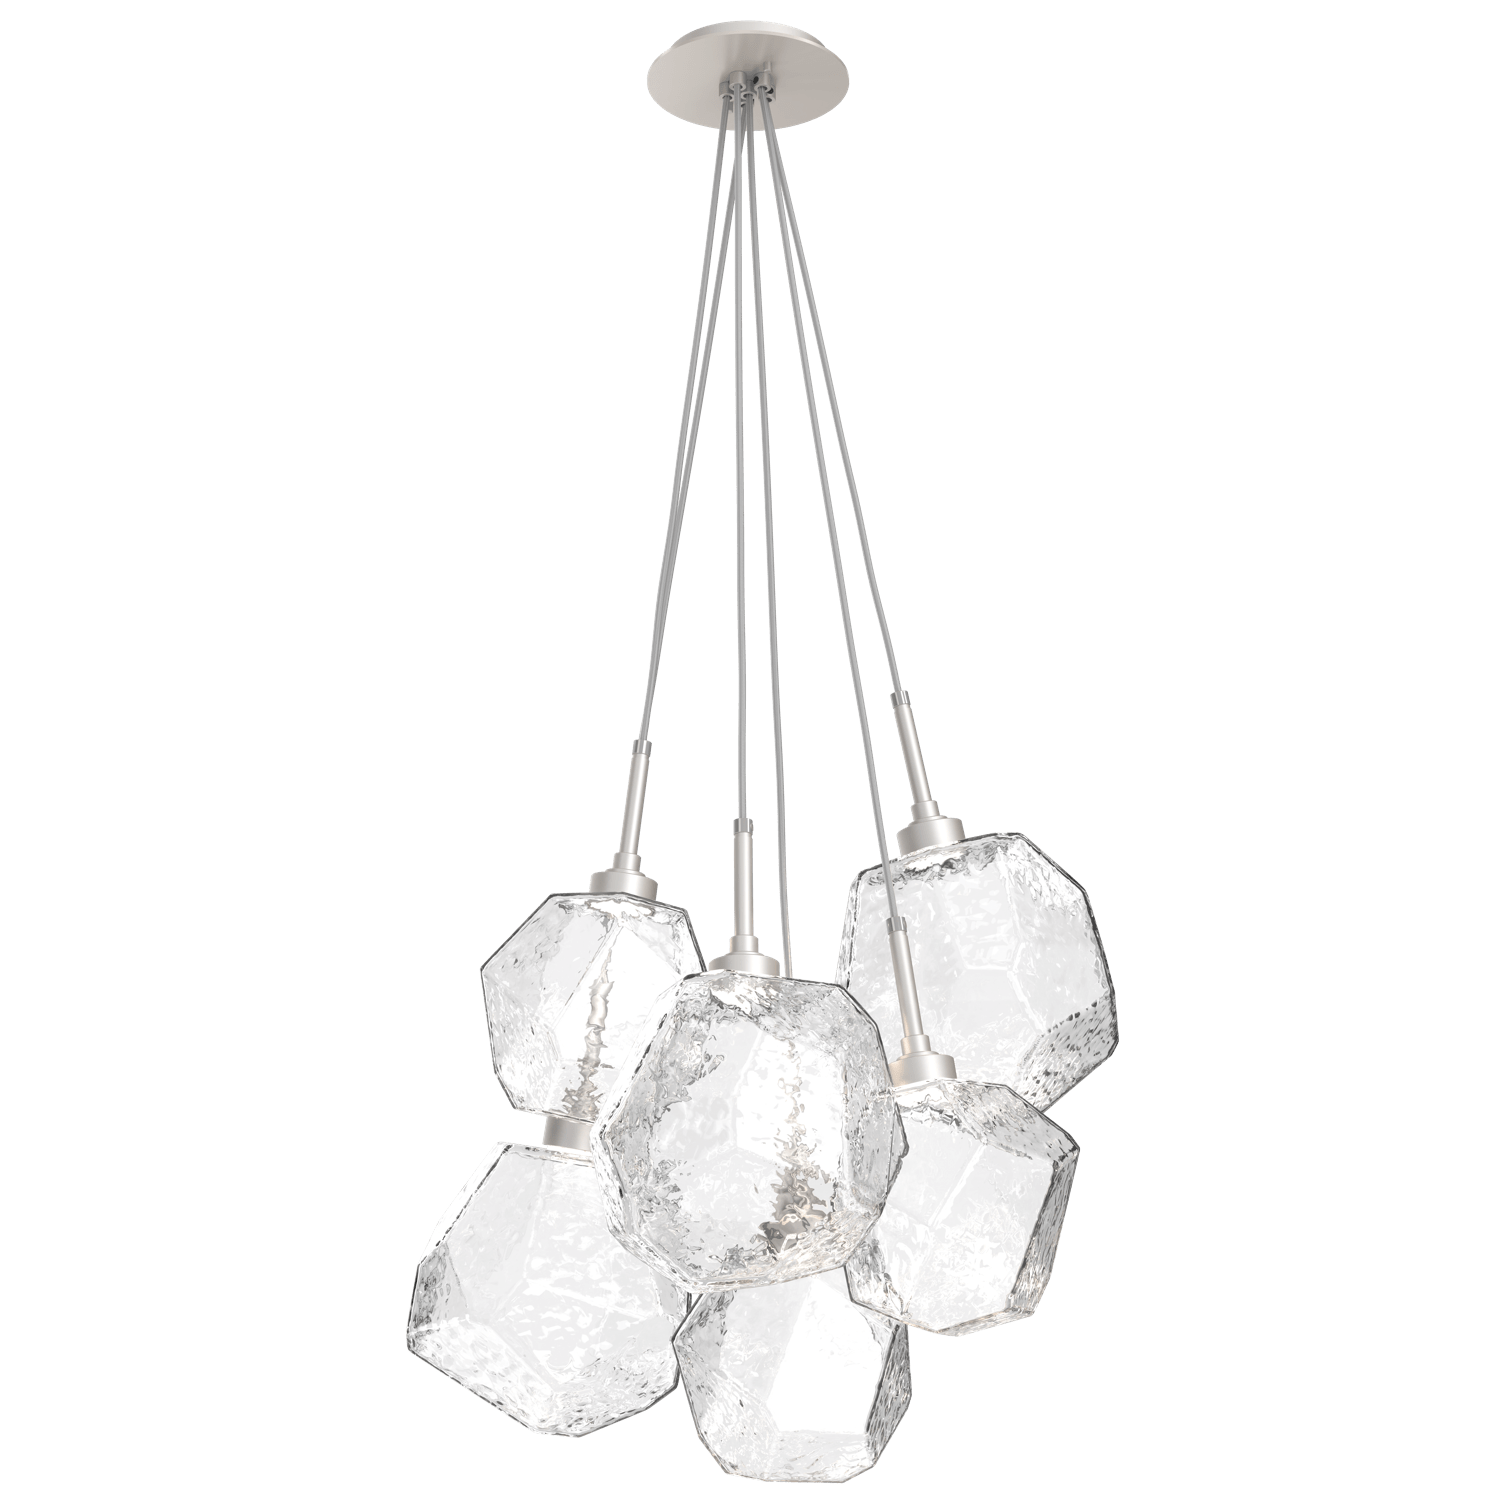 CHB0039-0F-BS-C-Hammerton-Studio-Gem-6-light-cluster-pendant-light-with-metallic-beige-silver-finish-and-clear-blown-glass-shades-and-LED-lamping